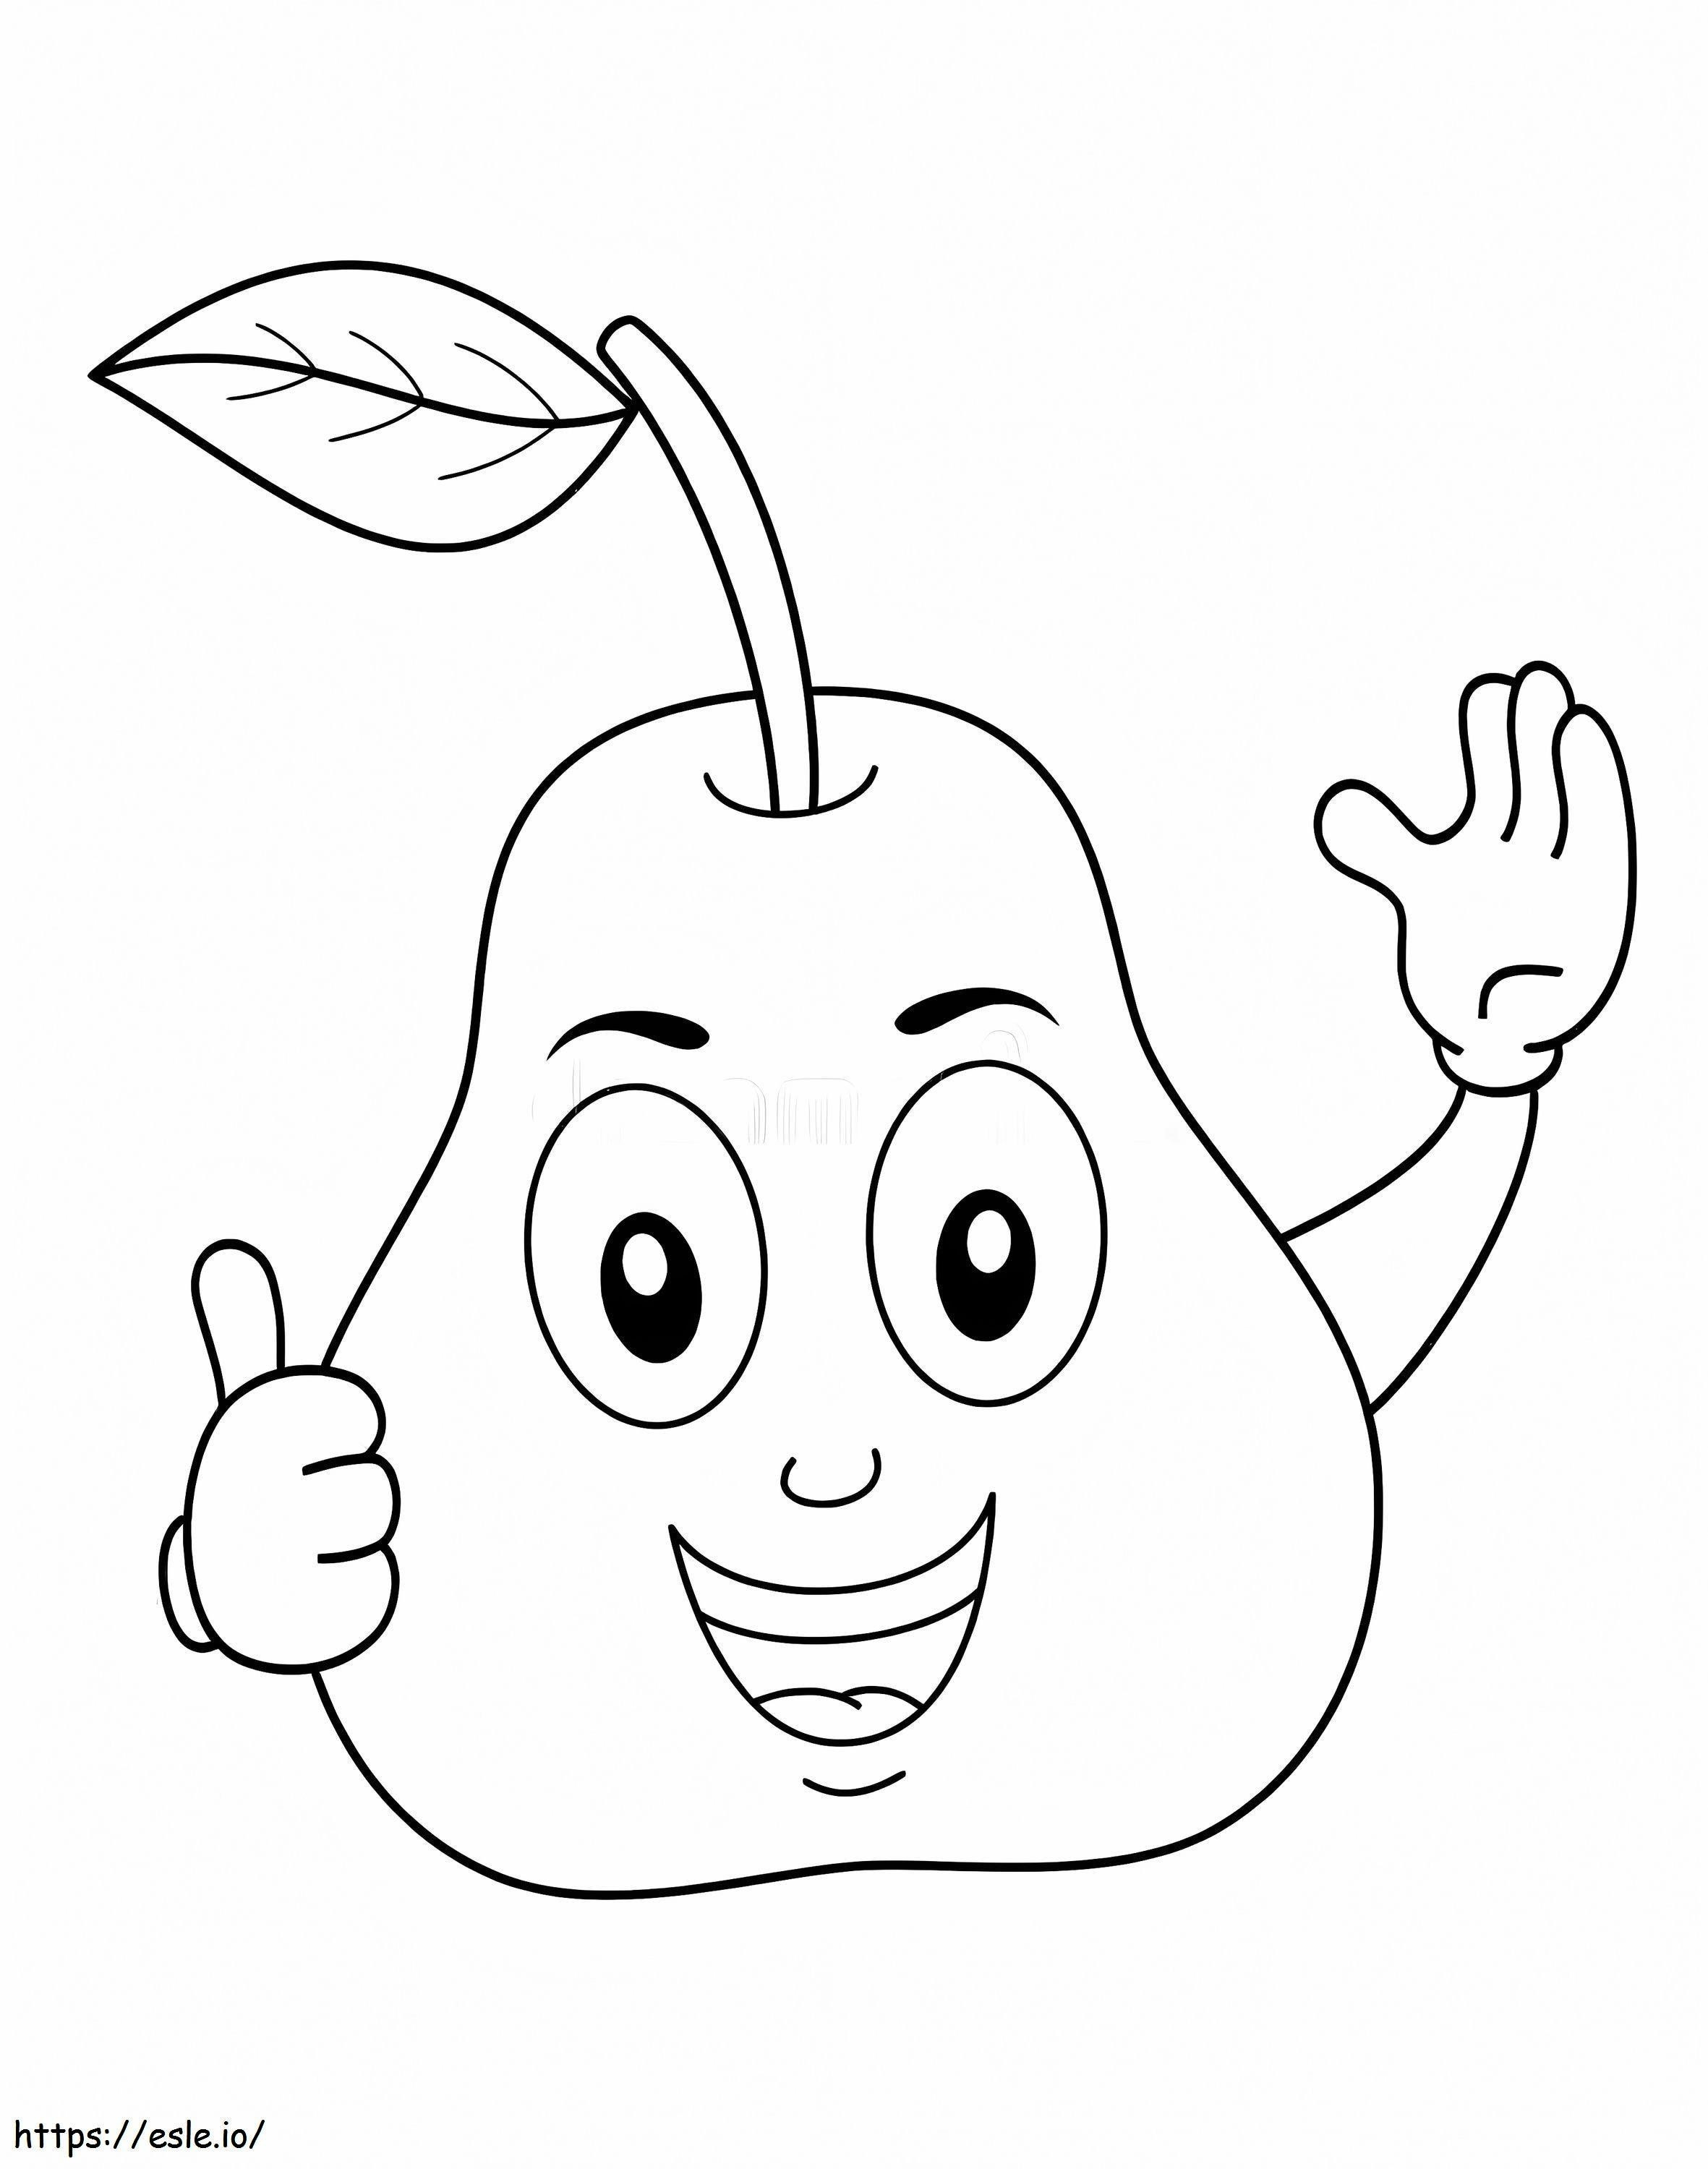 Fresh Pear coloring page